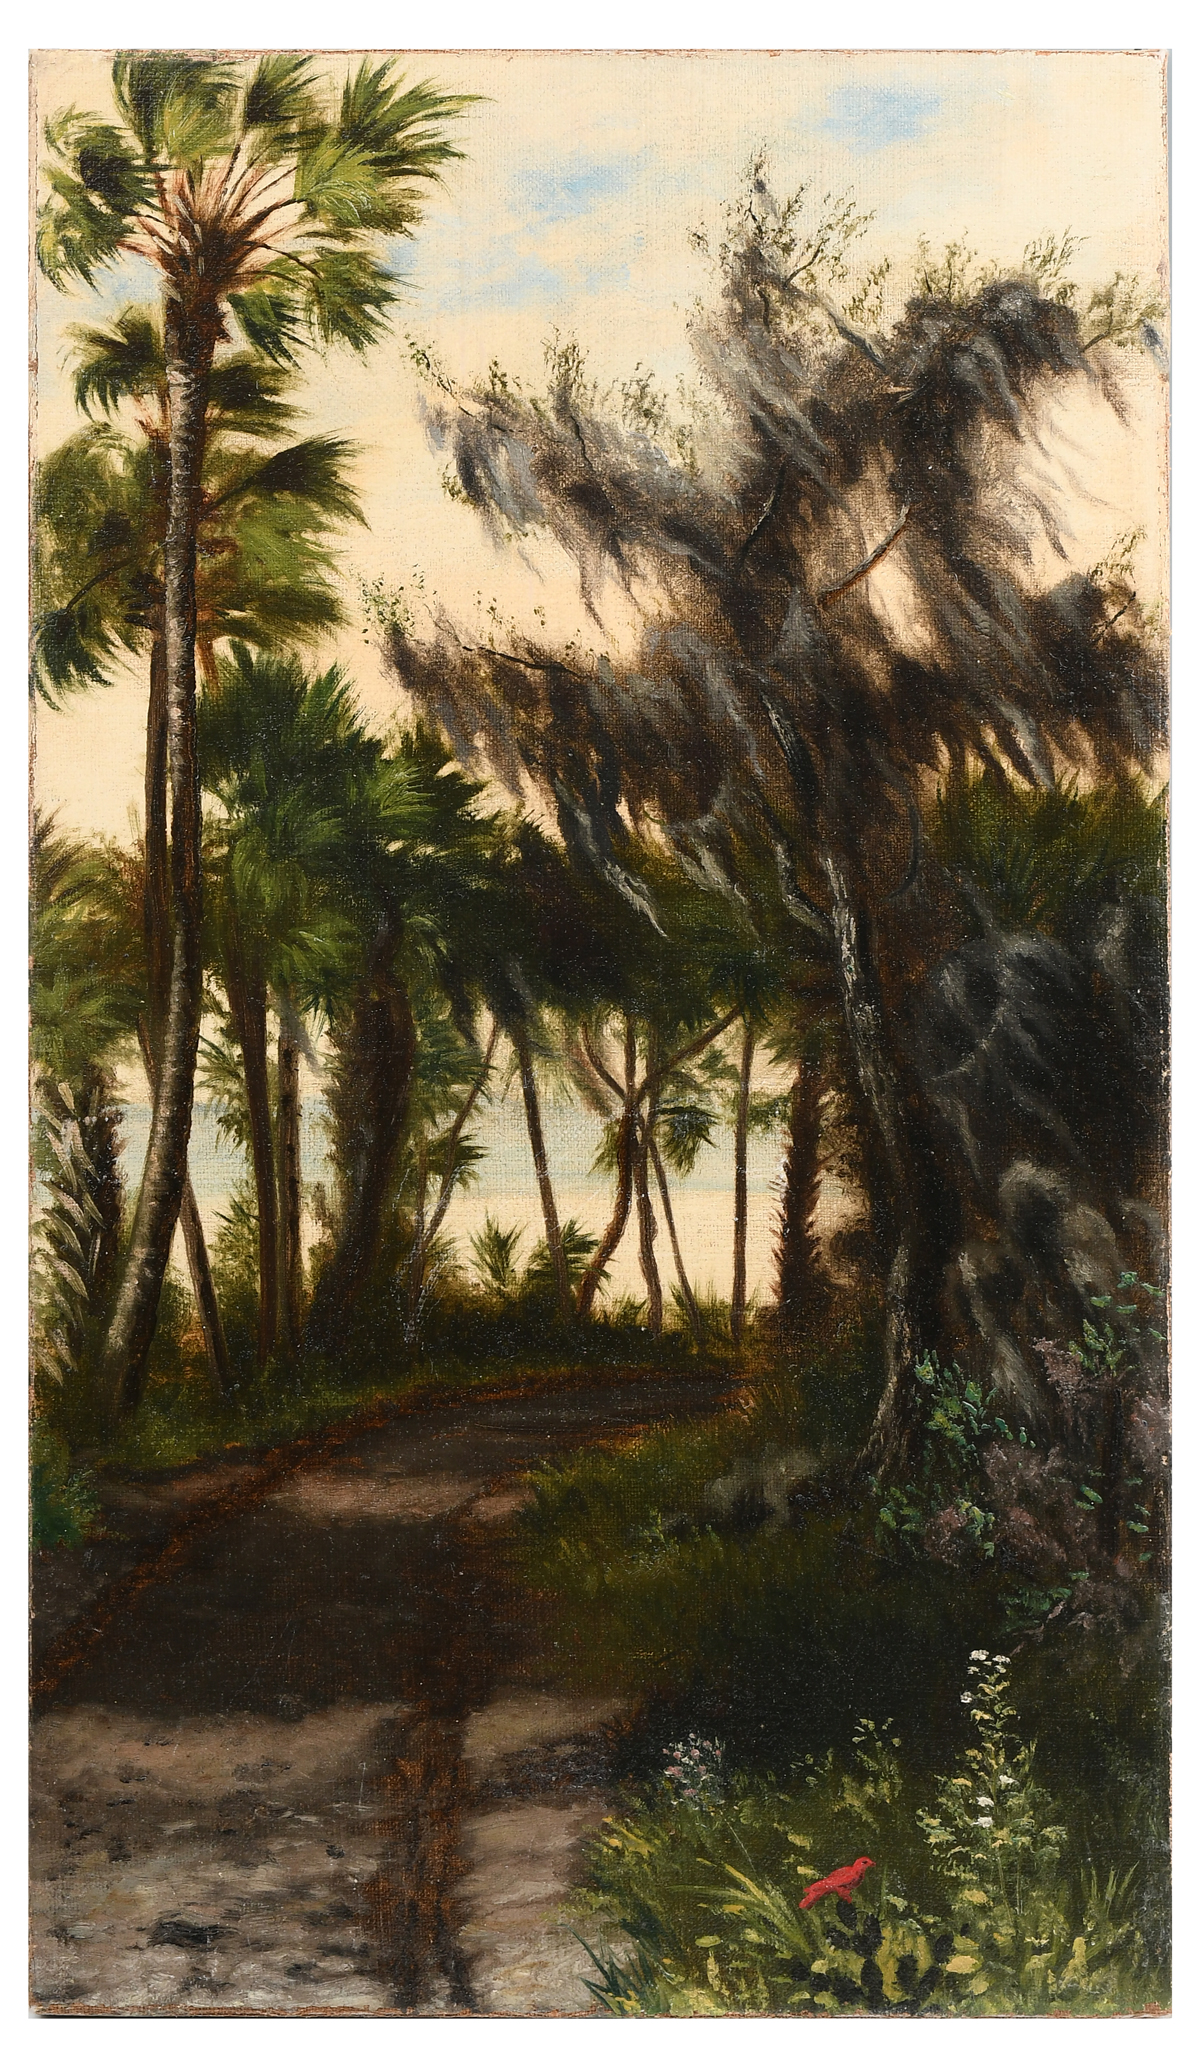 EARLY UNSIGNED FLORIDA LANDSCAPE 2ed3ee